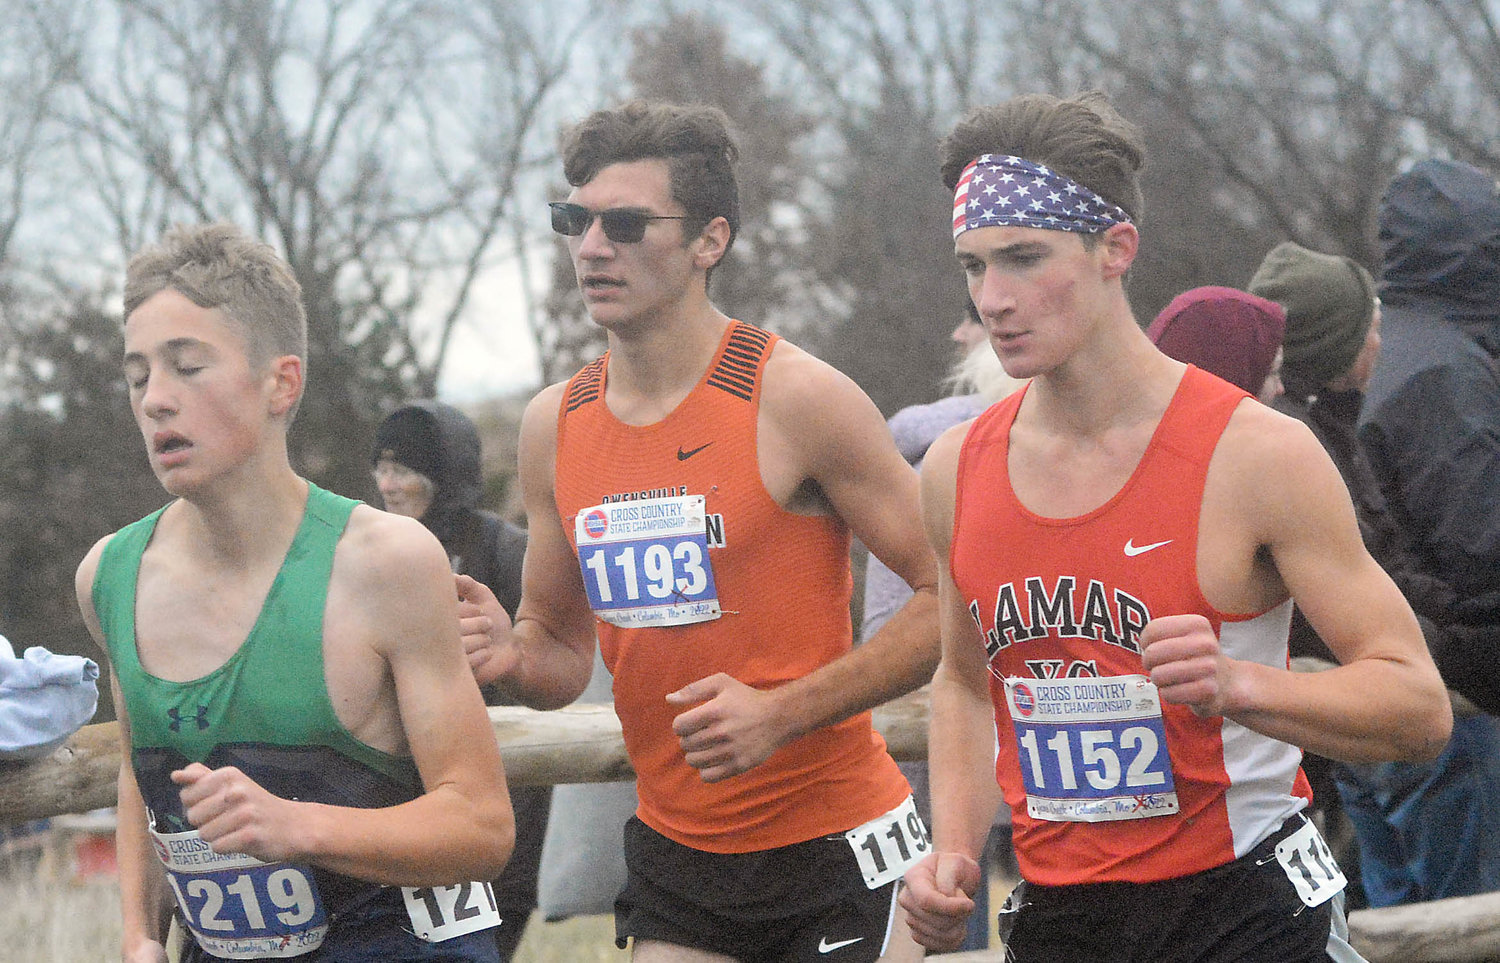 Felix Guerrero (center) competes in the Class 3 Boys Race with St. Michael the Archangel’s David Rogge in front of him and Lamar’s Blaine Breshears beside him.